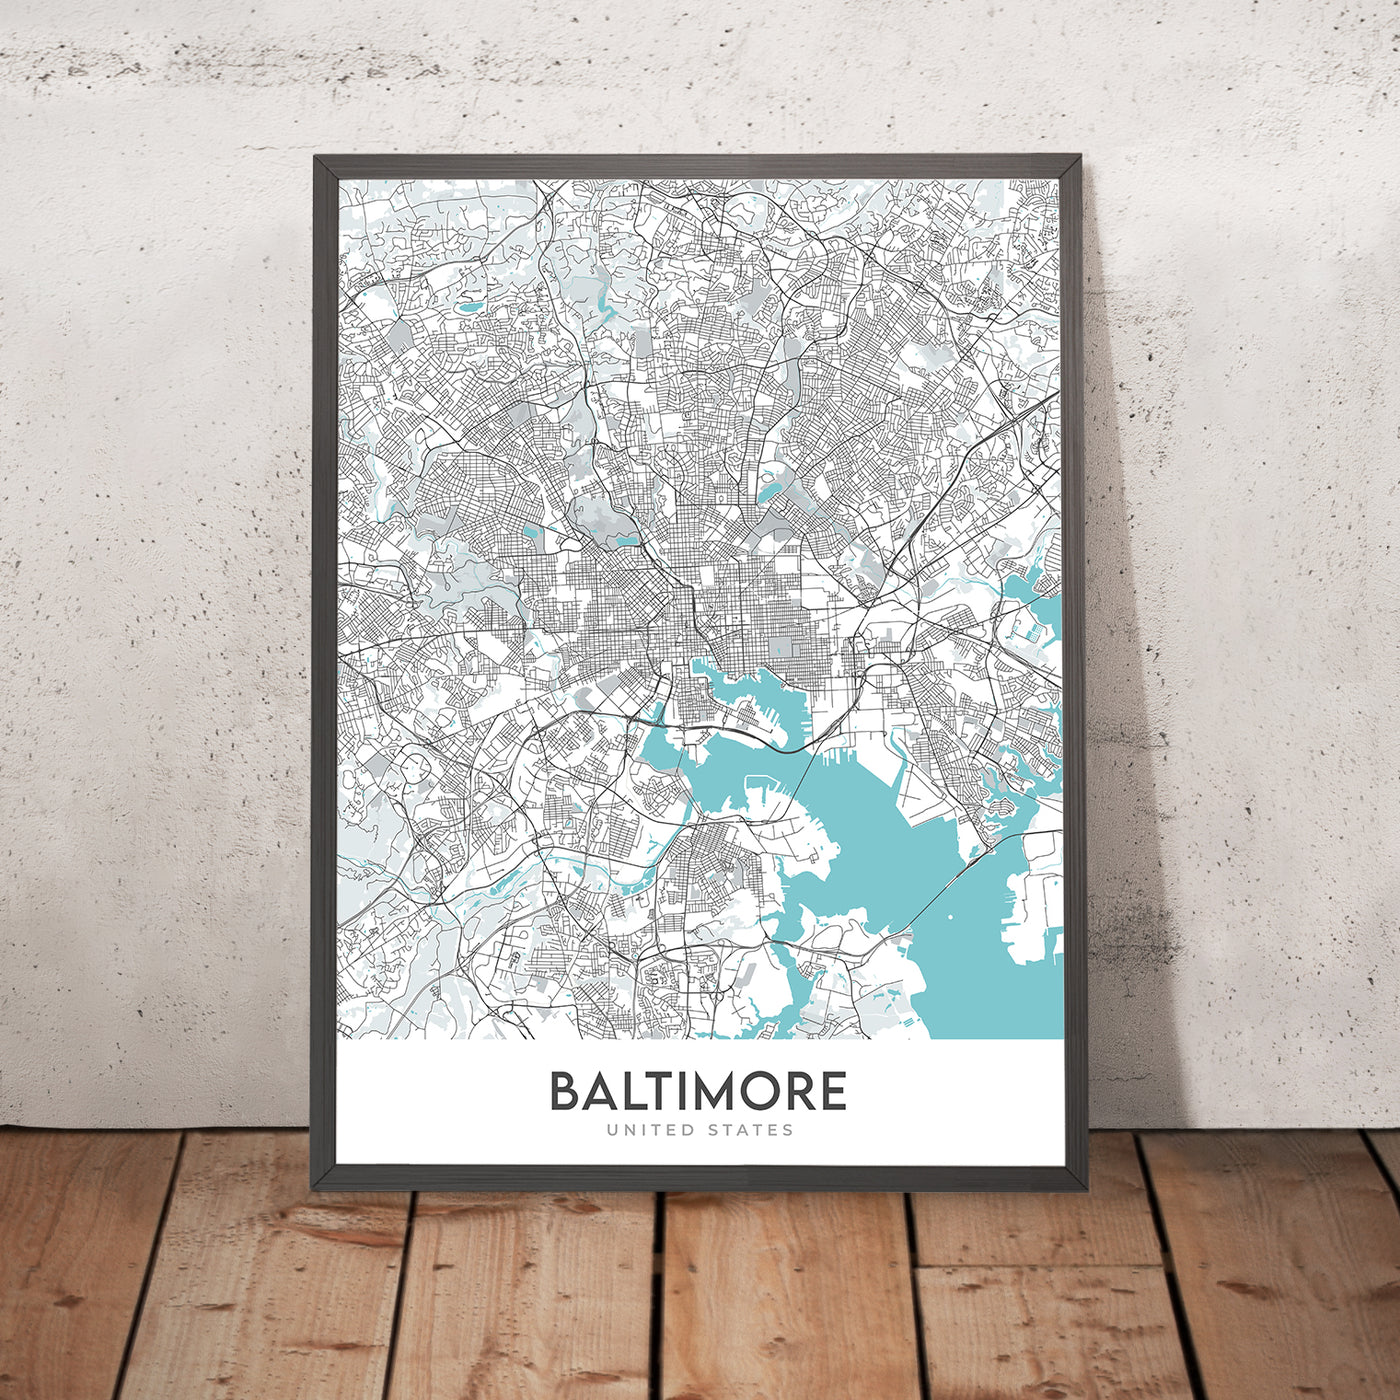 Modern City Map of Baltimore, MD: Inner Harbor, Oriole Park, U. of Maryland